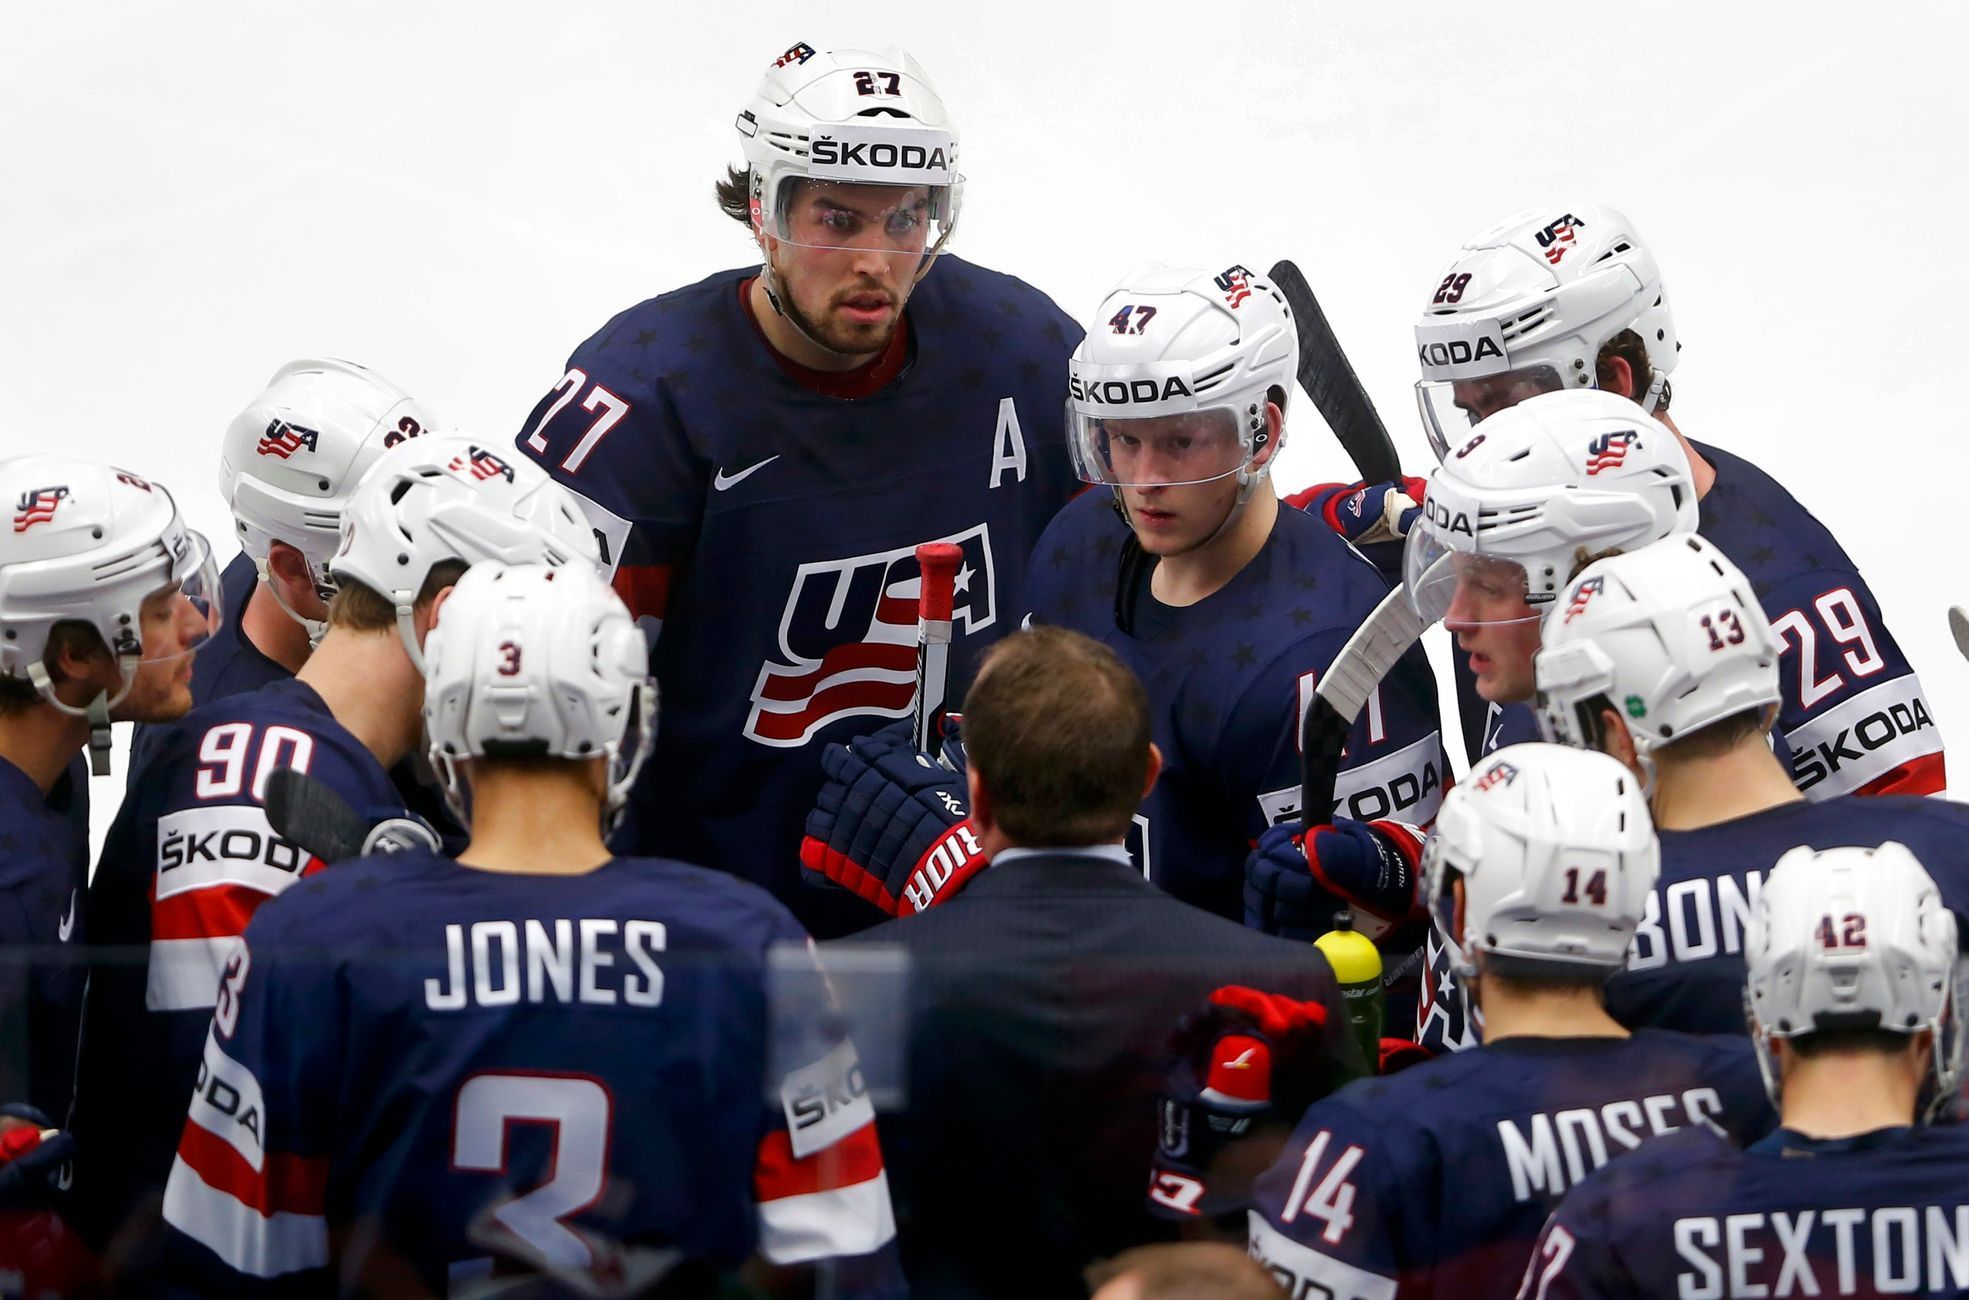 Head coach Richards of the US talks to his players during a time out during their ice hockey World Championship game against Russia during their ice hockey World Championship game in Ostrava